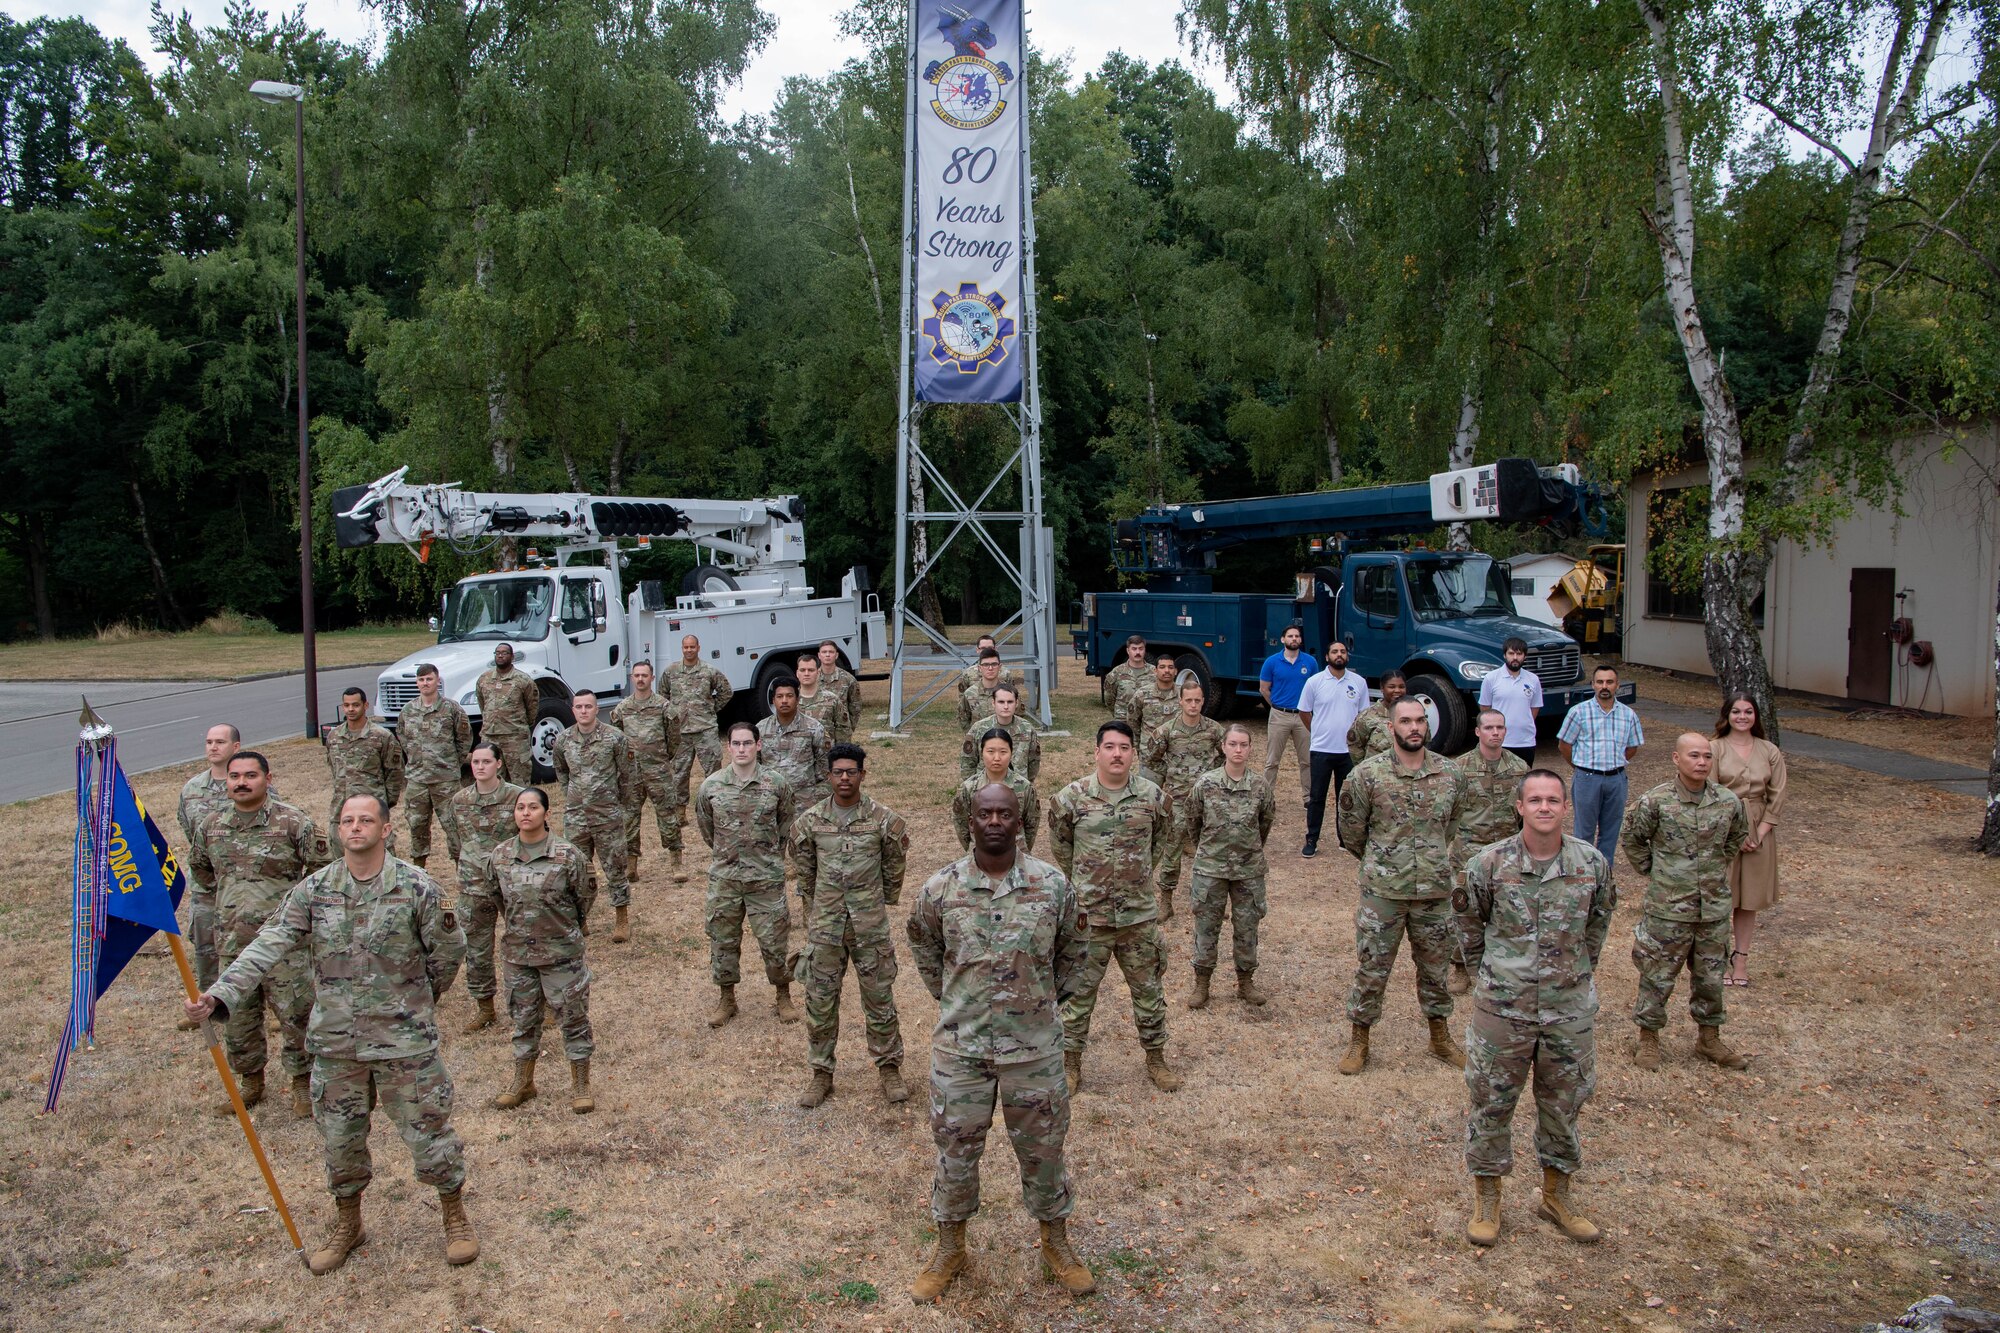 U.S. Air Force Airmen assigned to the 1st Communications Maintenance Squadron stand in a formation at Kapaun Air Station, Germany, Aug. 17, 2022.